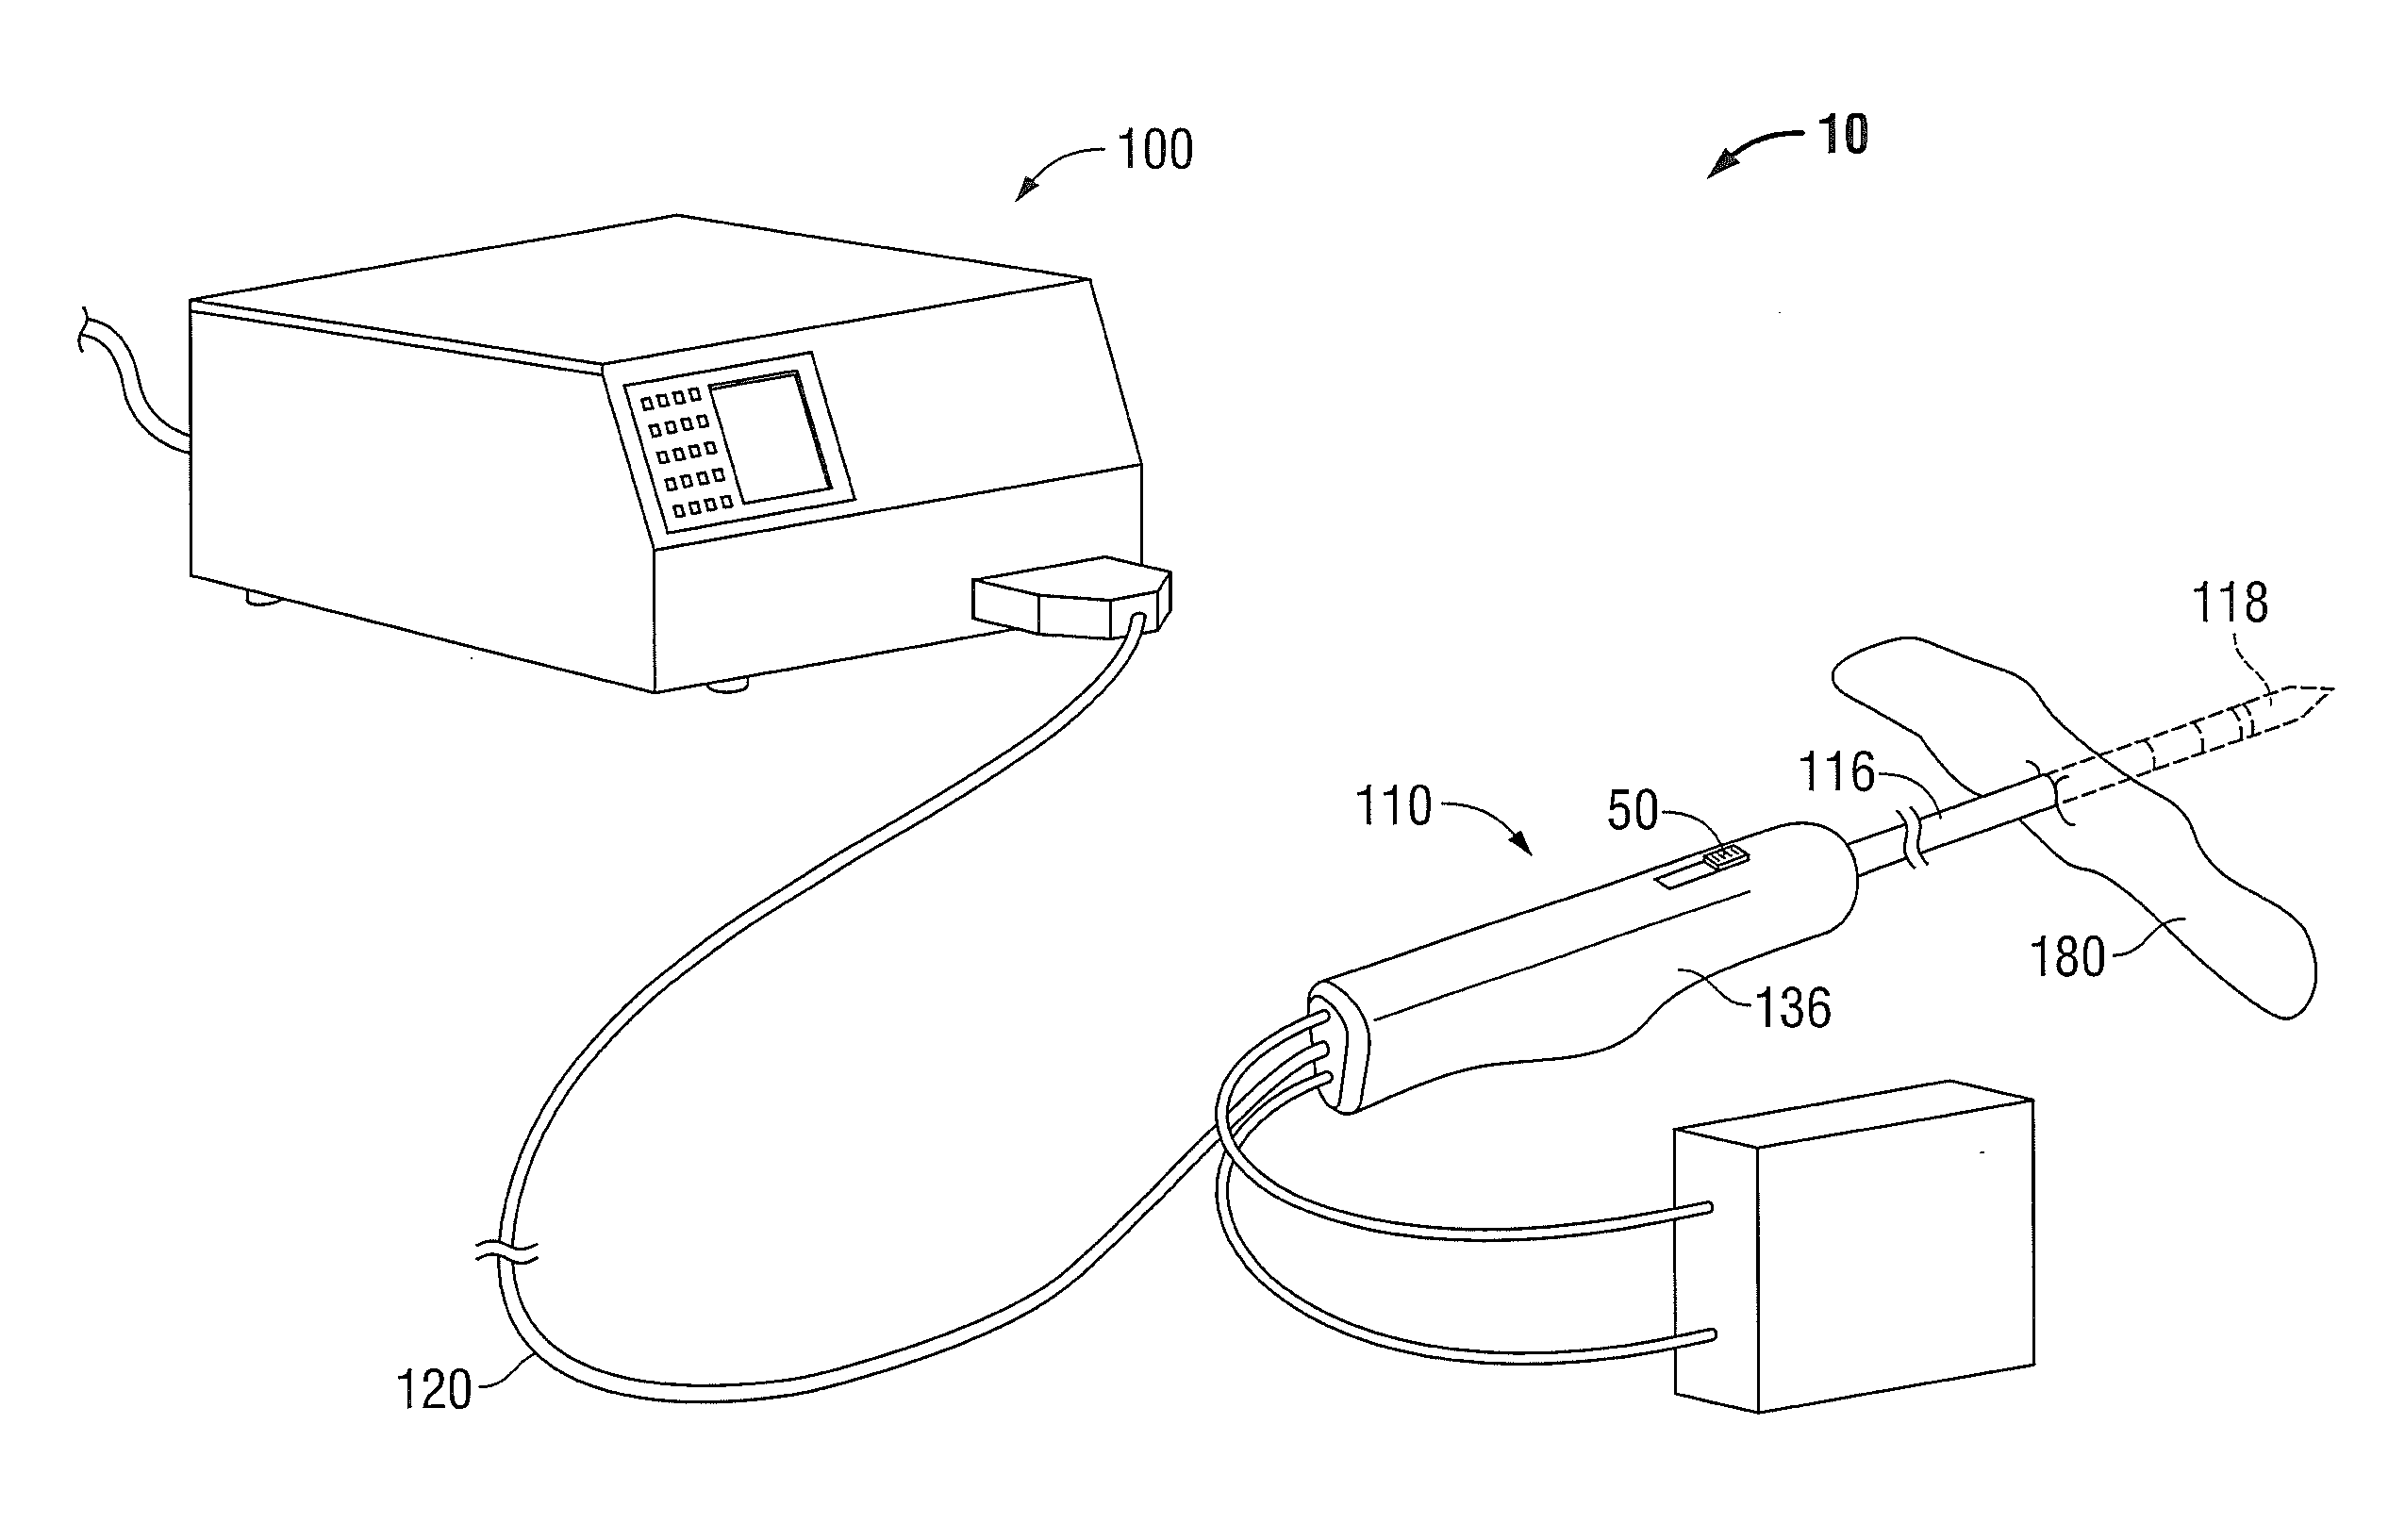 Energy-harvesting system, apparatus and methods